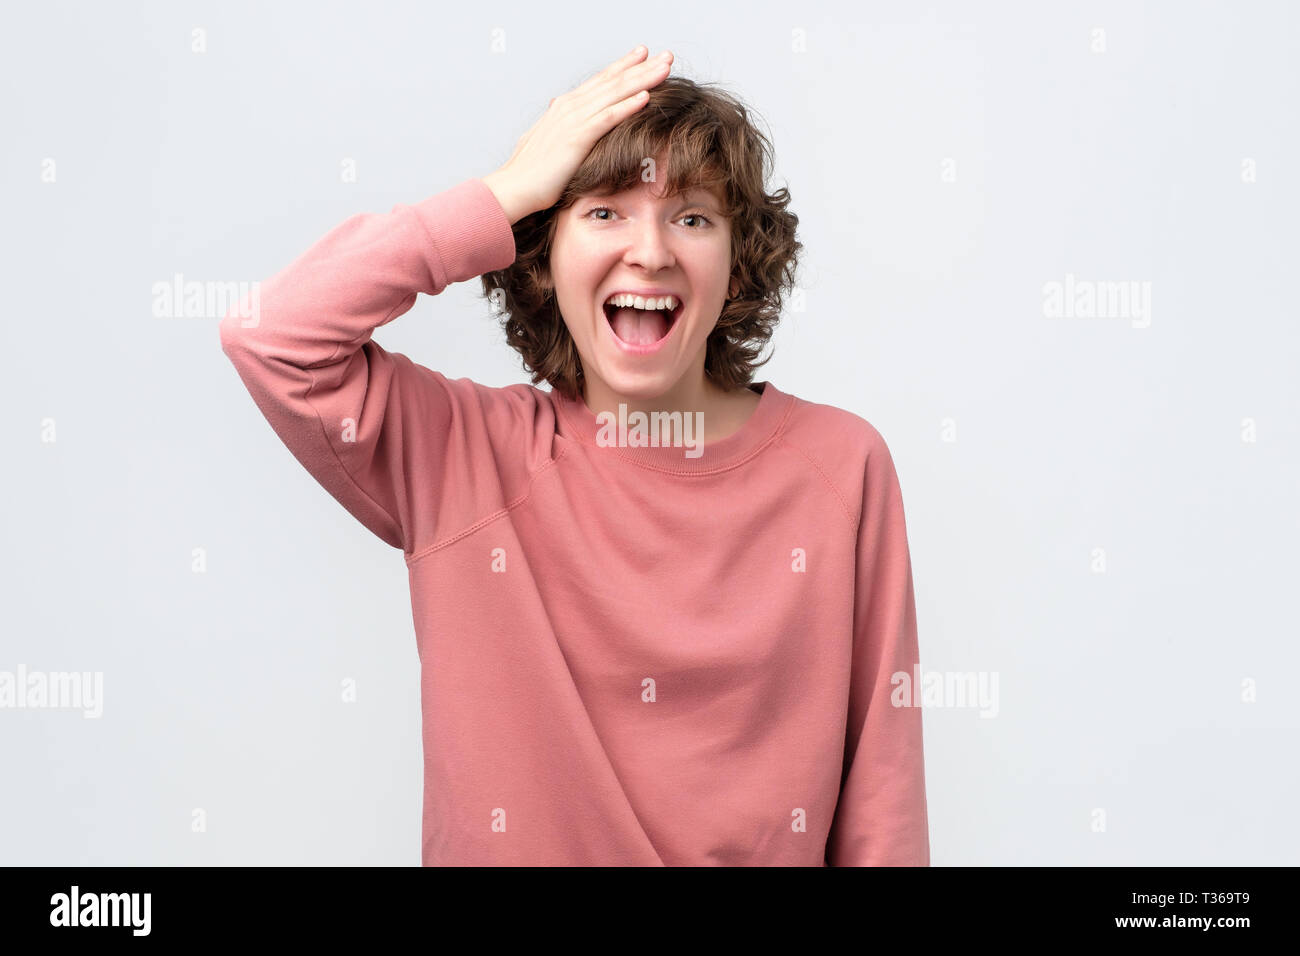 Forgetful young woman holding hand on her head struggling to remember something. Cute curly female student slapping forehead Stock Photo